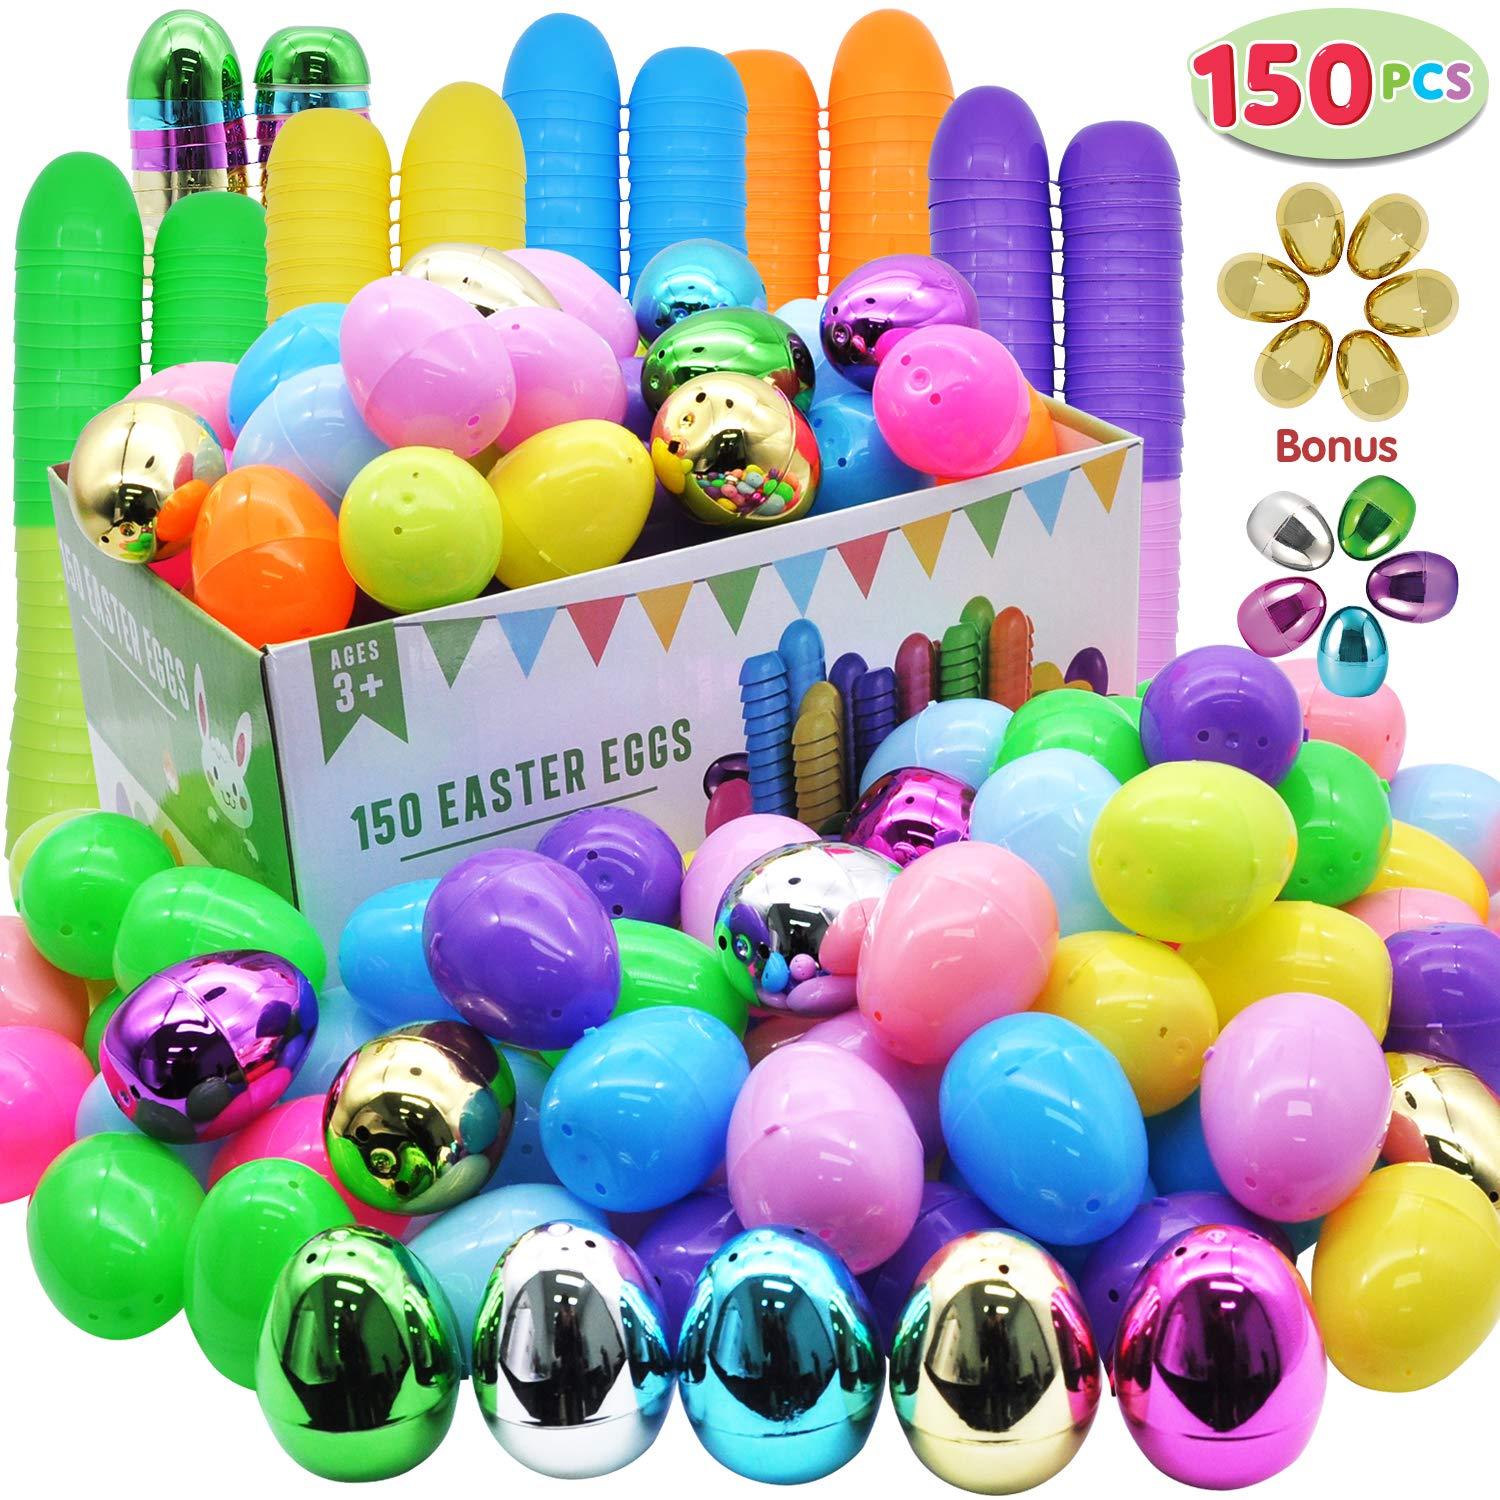 150 Pcs Easter Eggs Include 6 Golden Eggs And 10 Metallic Shining Eggs